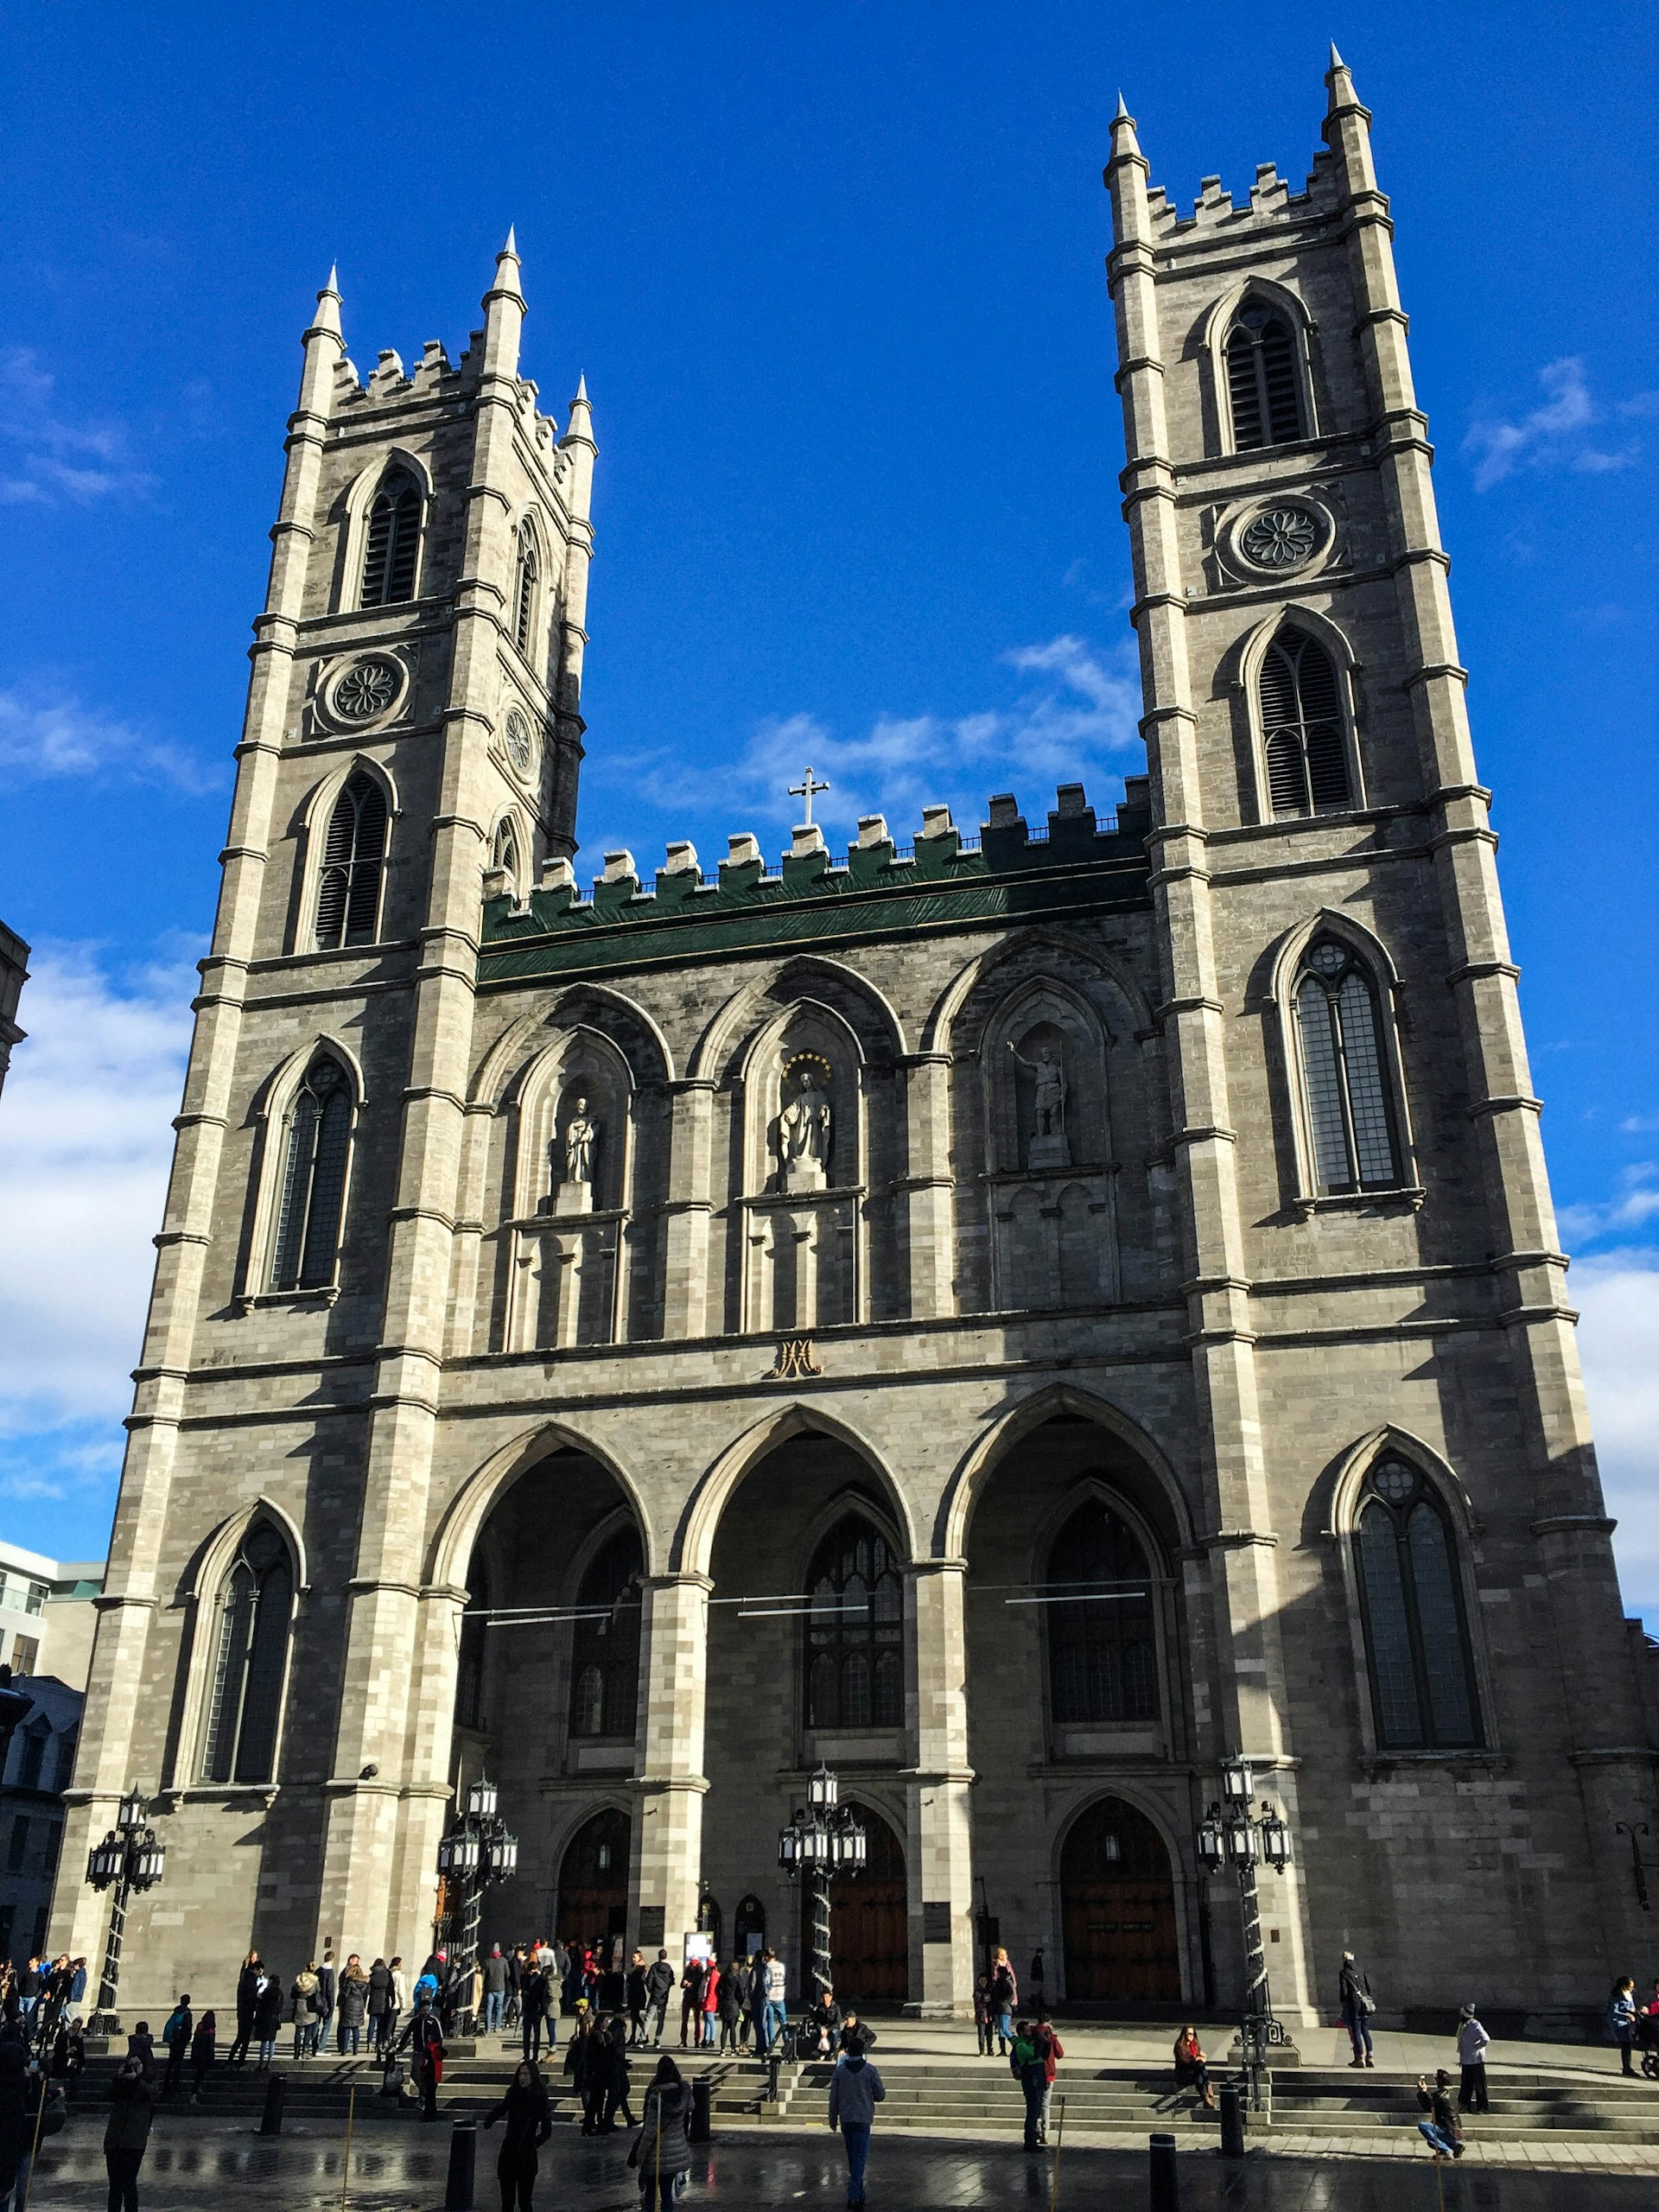 Among the many popular sights in Montréal, Basilique Notre-Dame is a perennial favorite © Tom Stainer / Lonely Planet